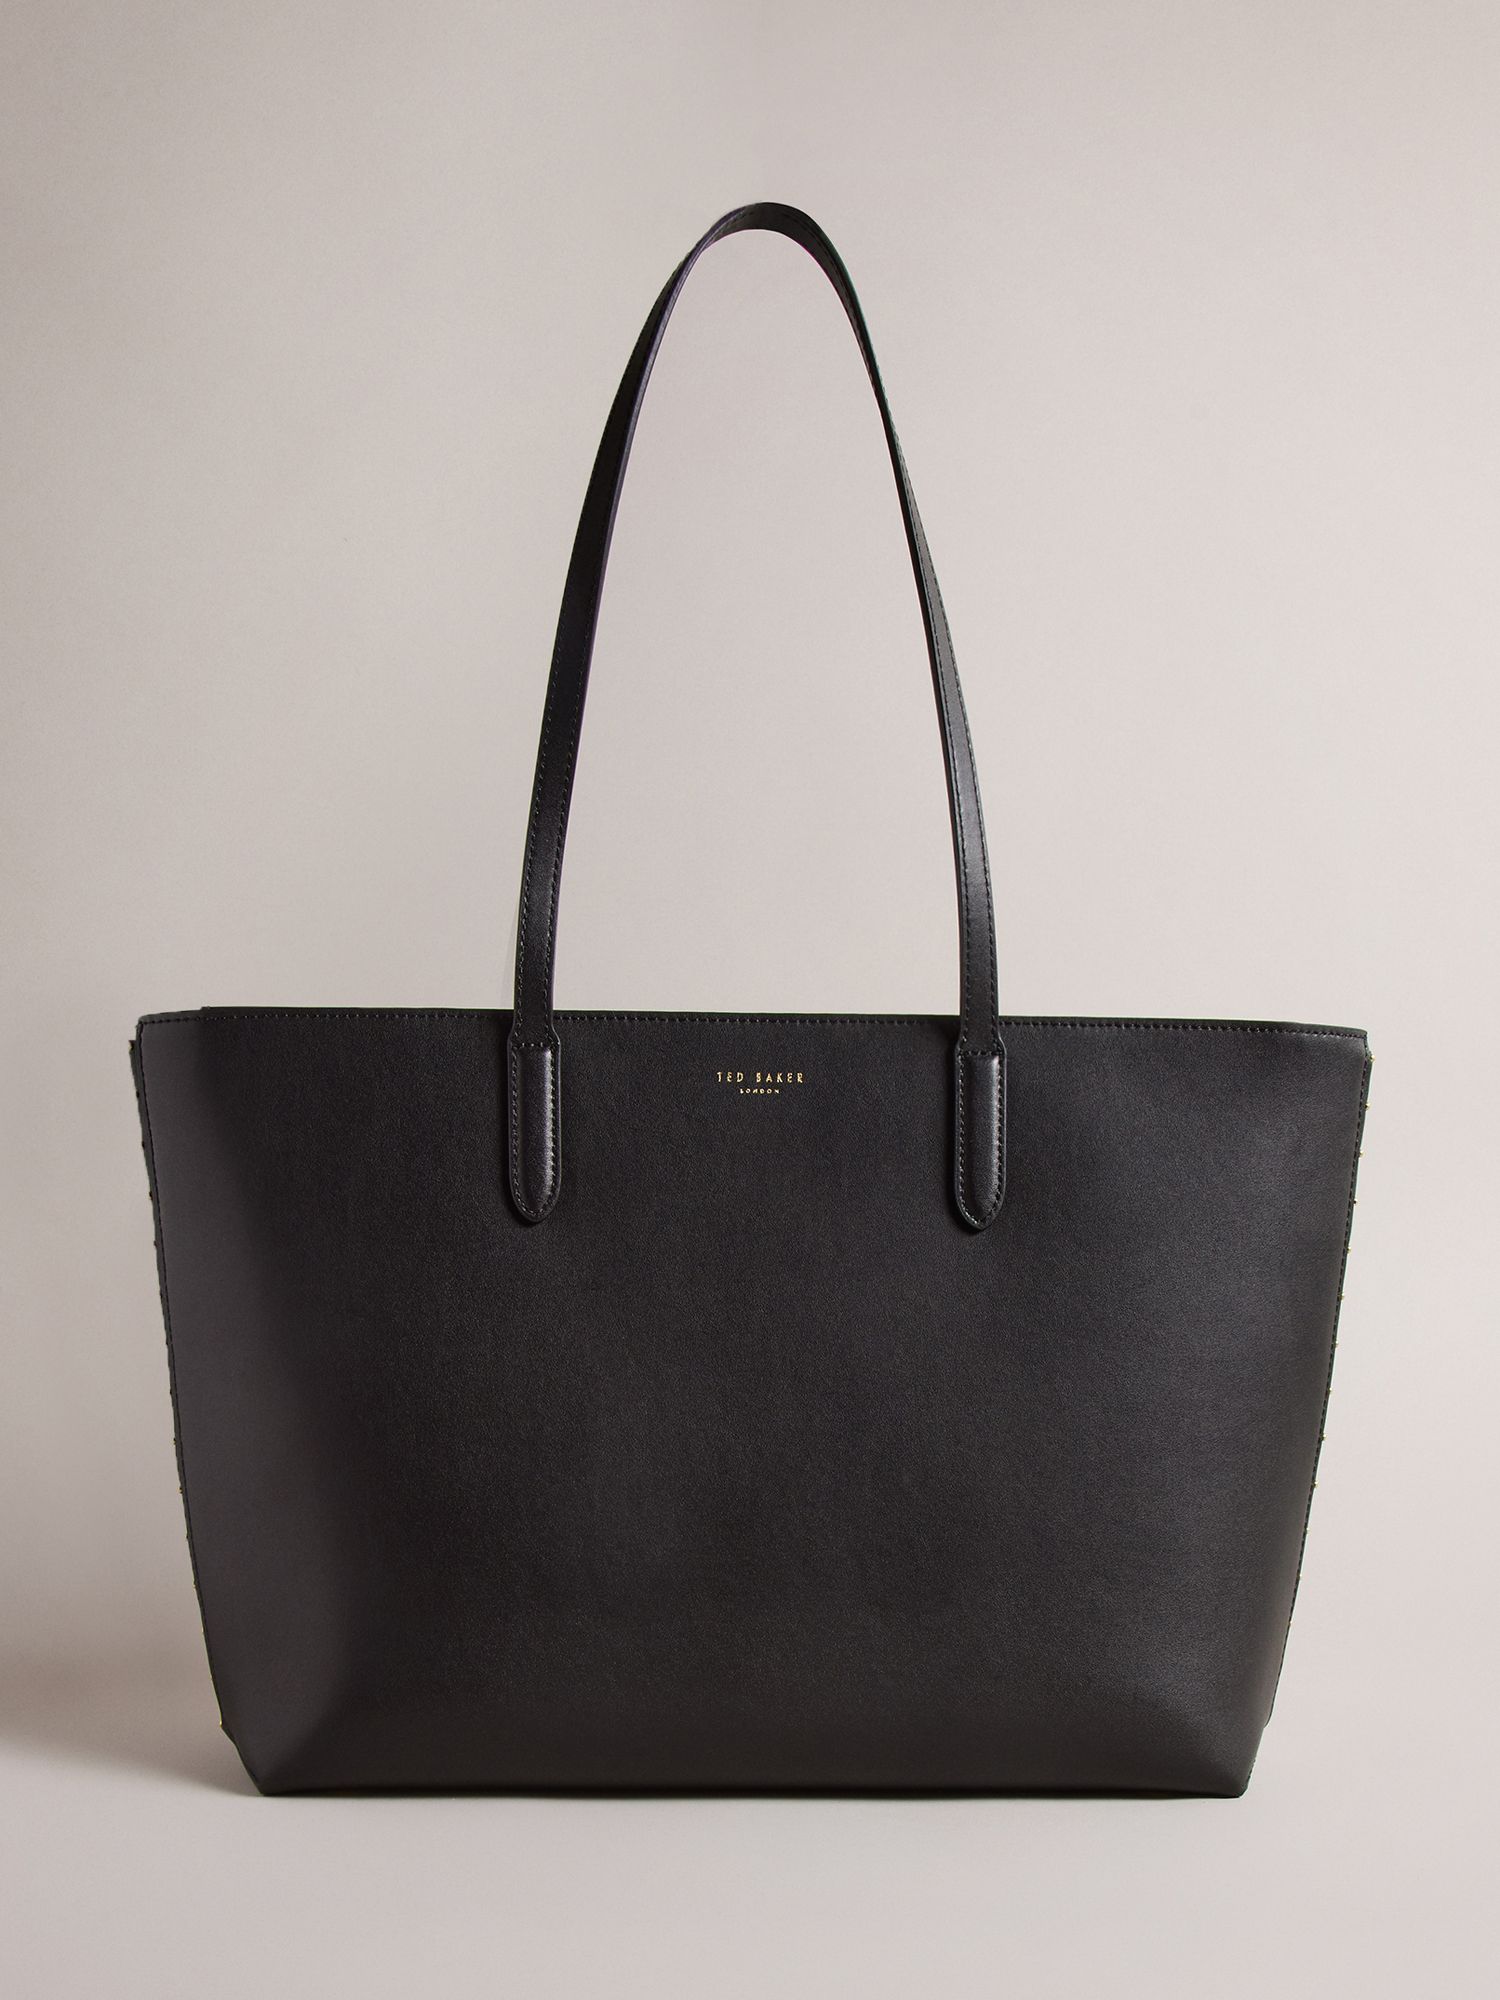 Ted Baker Kahlaa Studded Leather Tote Bag, Black, One Size